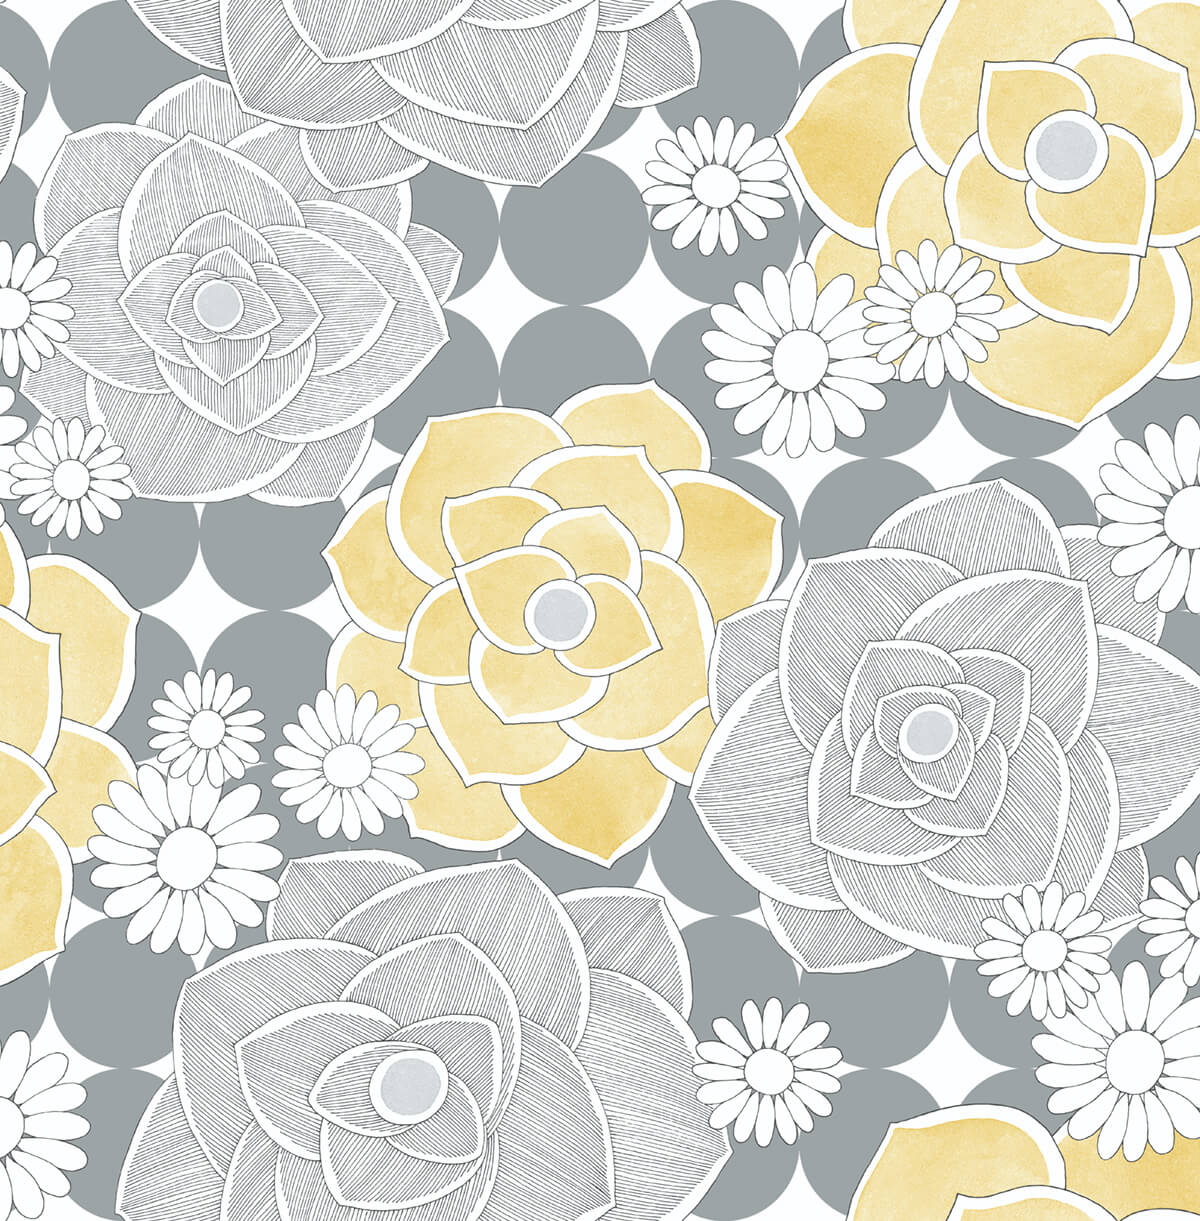 Schatzi Brown Retro Jumbo Daisy Removable Wallpaper  Urban Outfitters